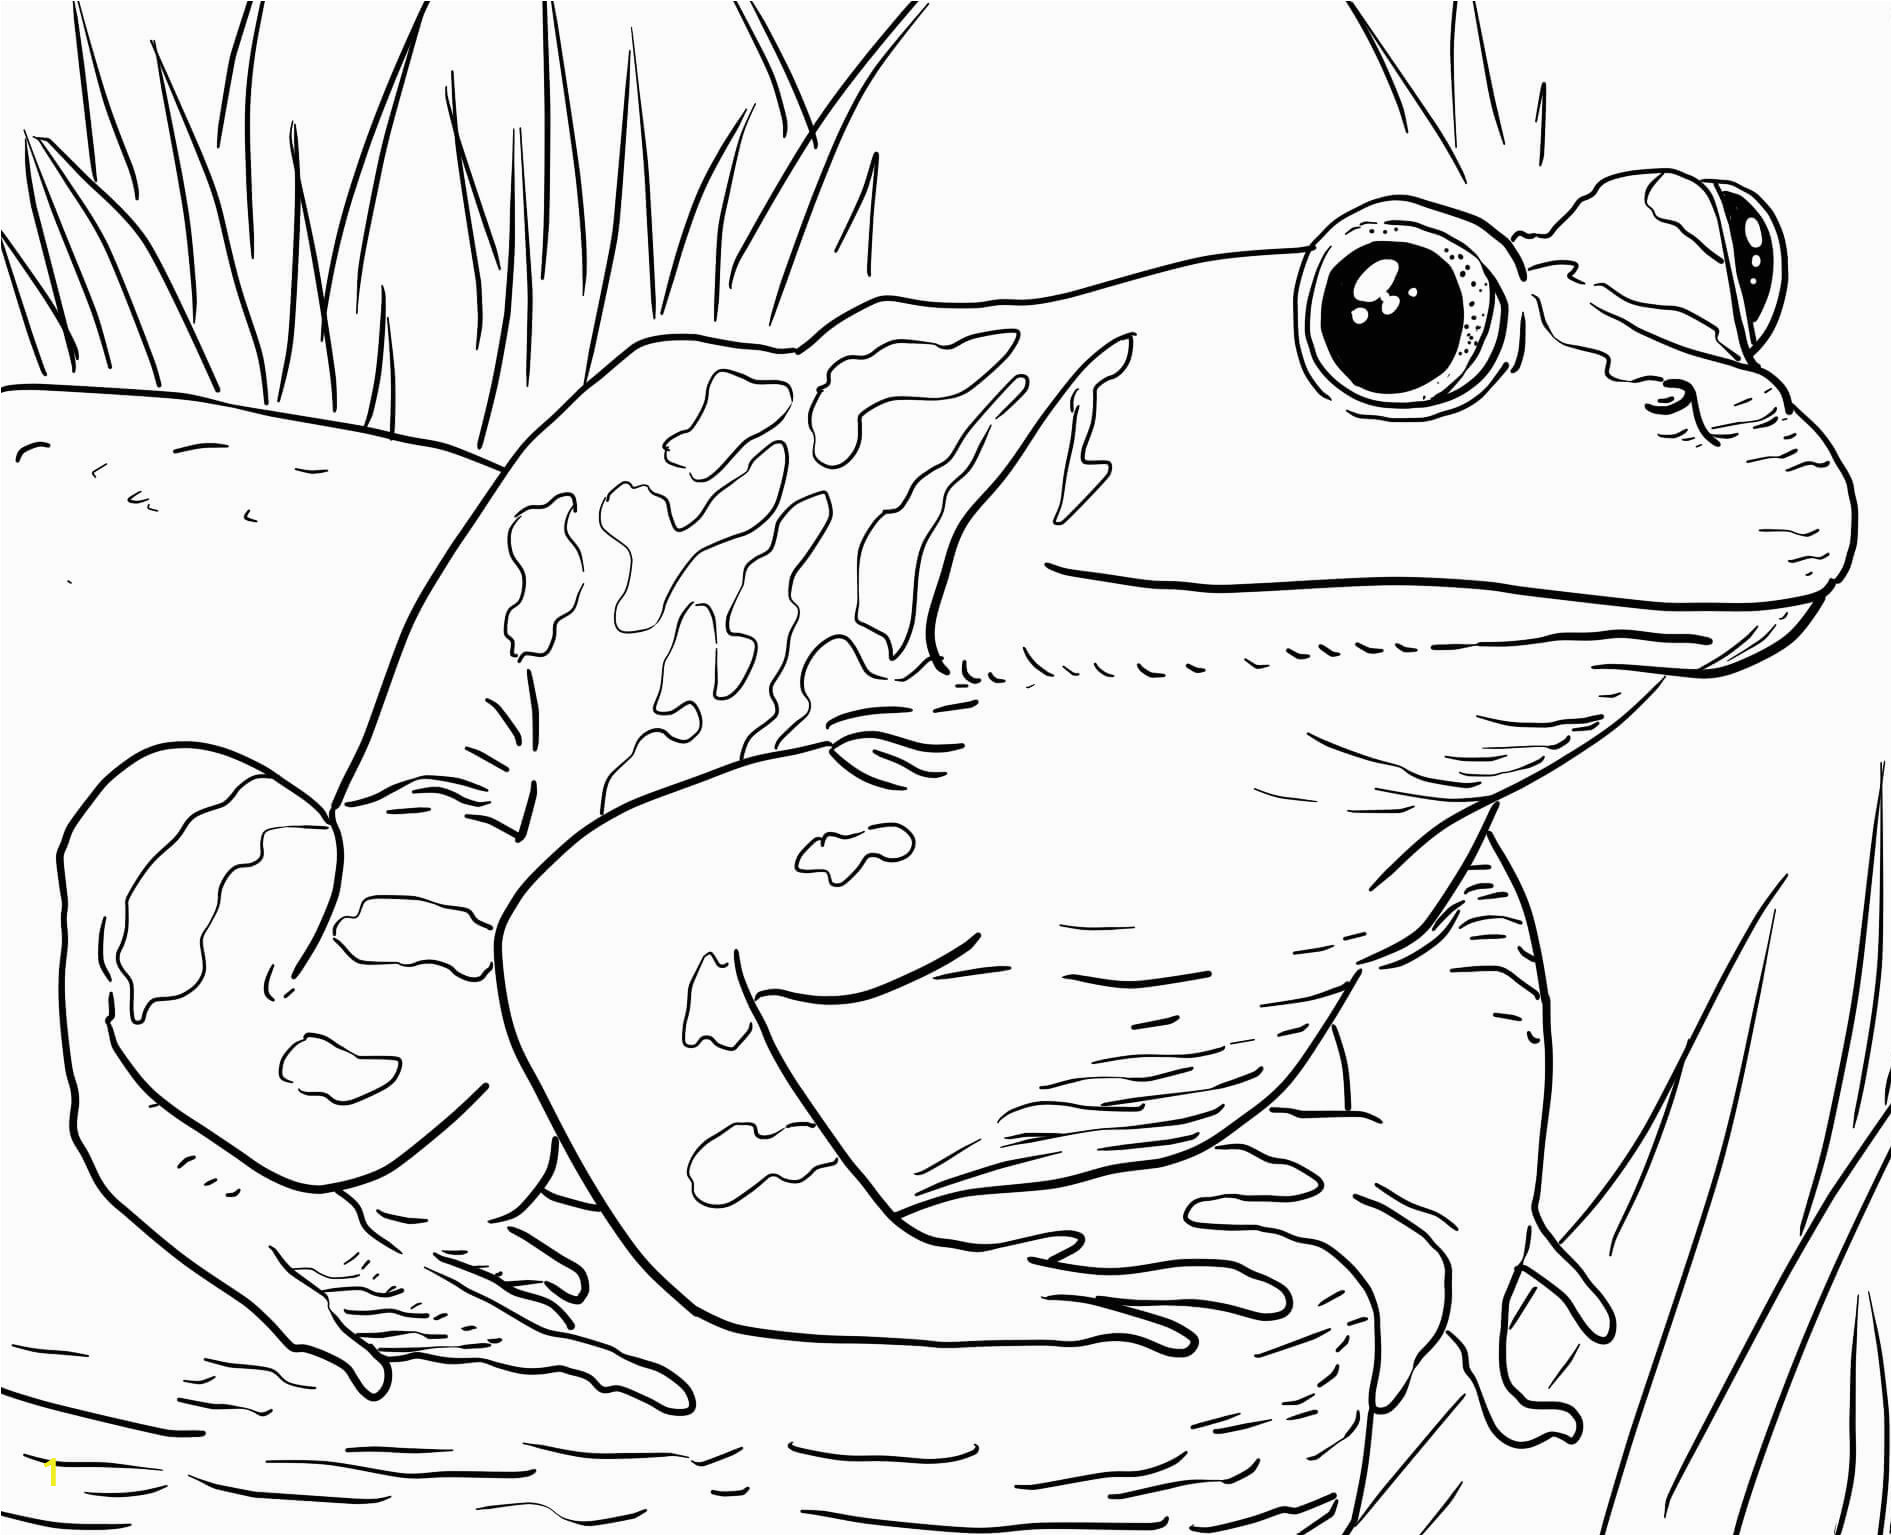 Free Preschool Coloring Pages Of Zoo Animals Zoo Animals Coloring Pages Best Coloring Pages for Kids